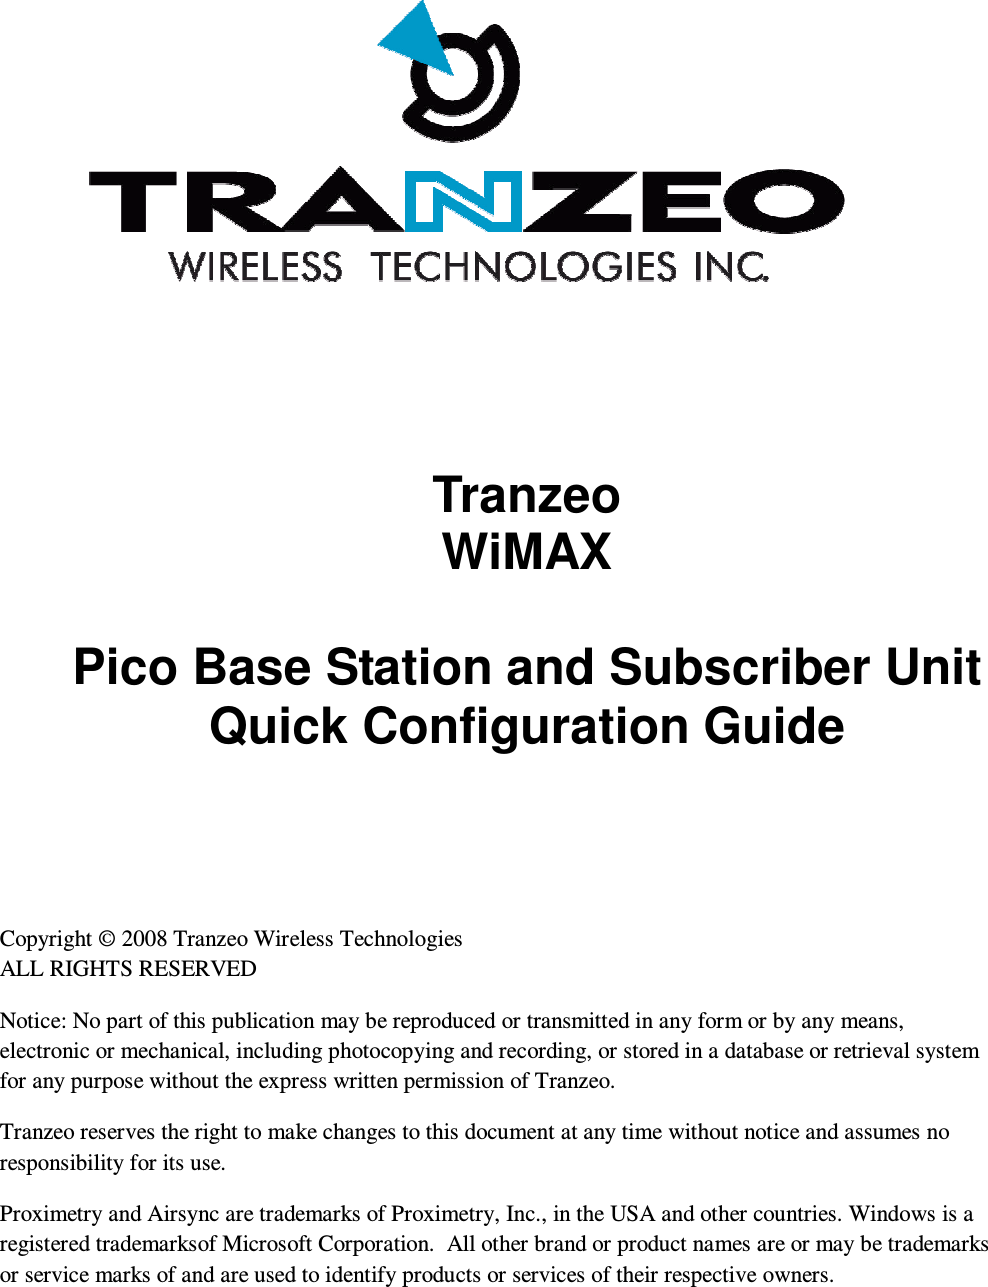  i  AirSync 2.2 Quick Configuration Guide – Tranzeo pBS                       Tranzeo WiMAX  Pico Base Station and Subscriber Unit Quick Configuration Guide Copyright © 2008 Tranzeo Wireless Technologies ALL RIGHTS RESERVED Notice: No part of this publication may be reproduced or transmitted in any form or by any means, electronic or mechanical, including photocopying and recording, or stored in a database or retrieval system for any purpose without the express written permission of Tranzeo. Tranzeo reserves the right to make changes to this document at any time without notice and assumes no responsibility for its use. Proximetry and Airsync are trademarks of Proximetry, Inc., in the USA and other countries. Windows is a registered trademarksof Microsoft Corporation.  All other brand or product names are or may be trademarks or service marks of and are used to identify products or services of their respective owners. 